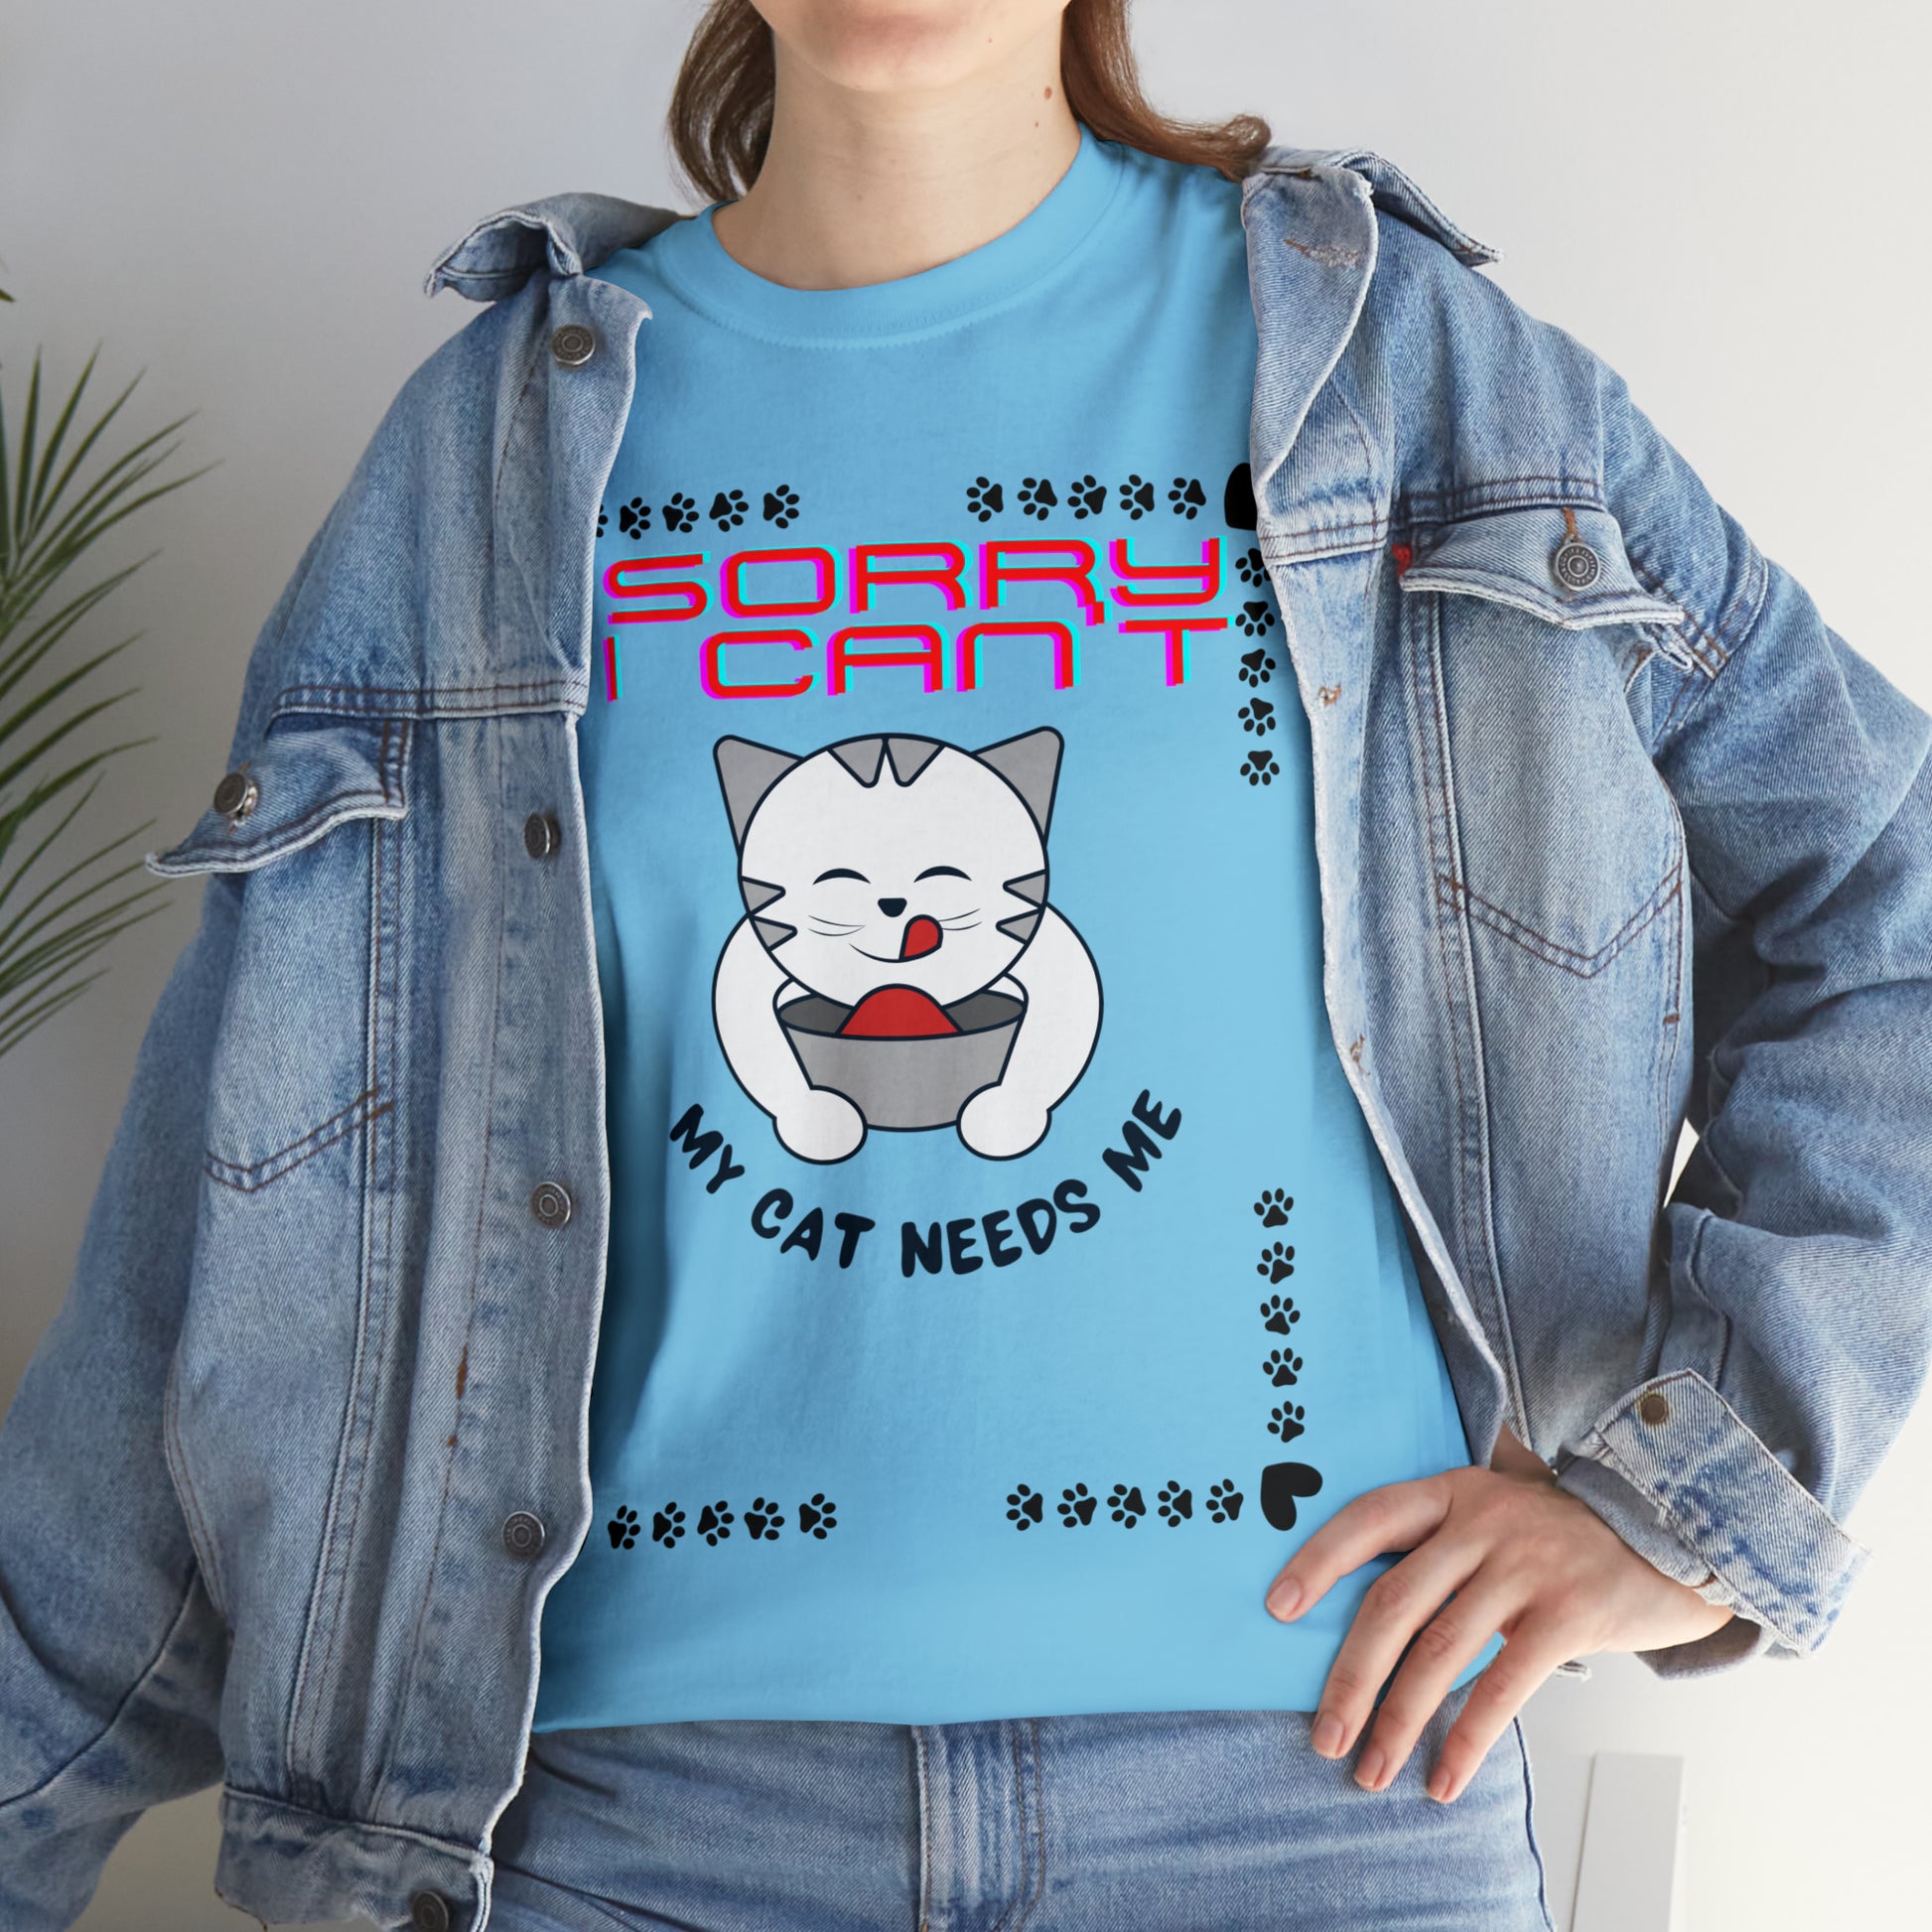 Sorry I Can't My Cat Needs Me T-Shirt | Cat Mom Shirt | Cat Lover Gift | Cat Mom Gift | Animal Lover Gift for Women T-Shirt Sky S 